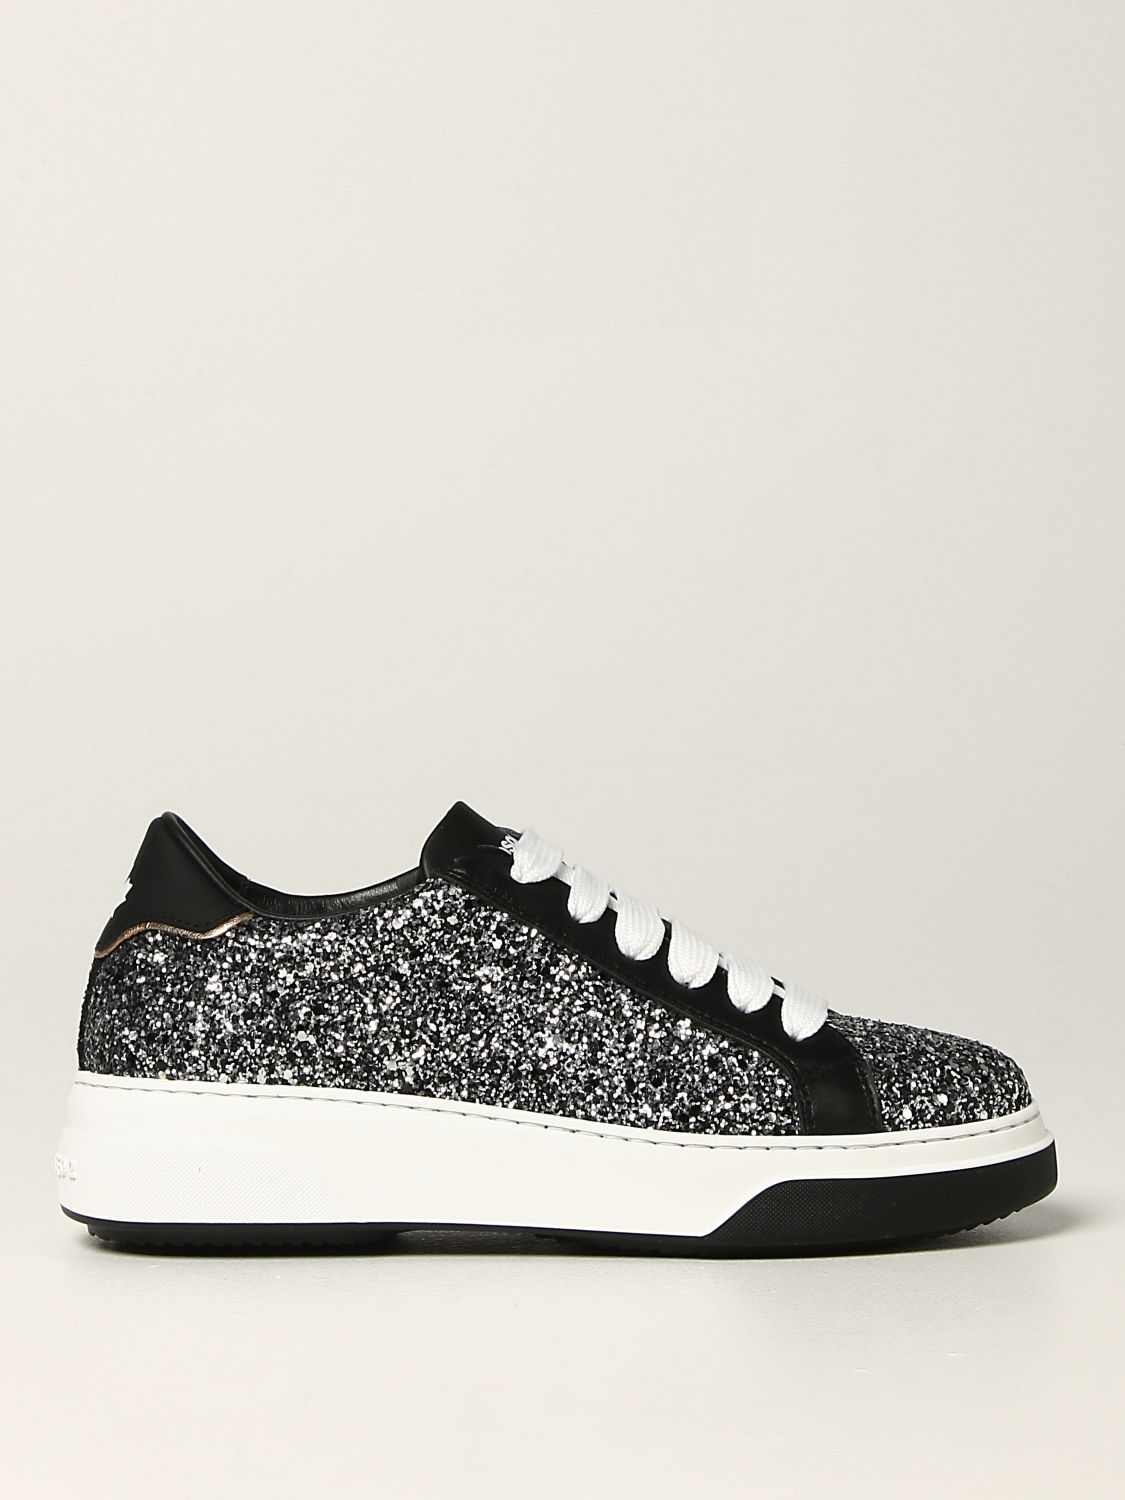 Liever slachtoffers Banyan DSQUARED2: glitter Bumper sneakers - Black | Dsquared2 sneakers  SNW014629204326 online on GIGLIO.COM